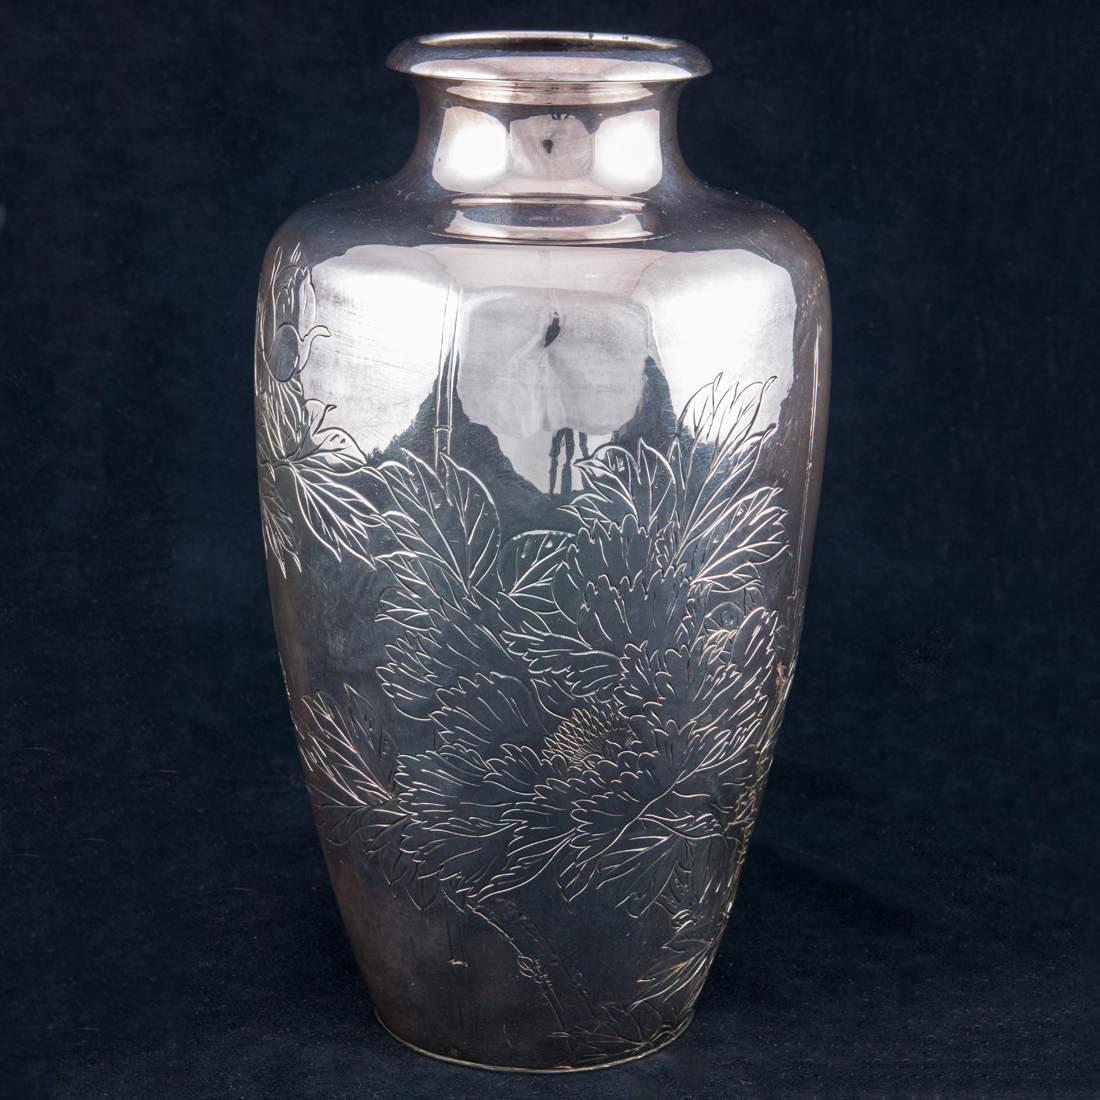 A JAPANESE SILVER VASE A Japanese